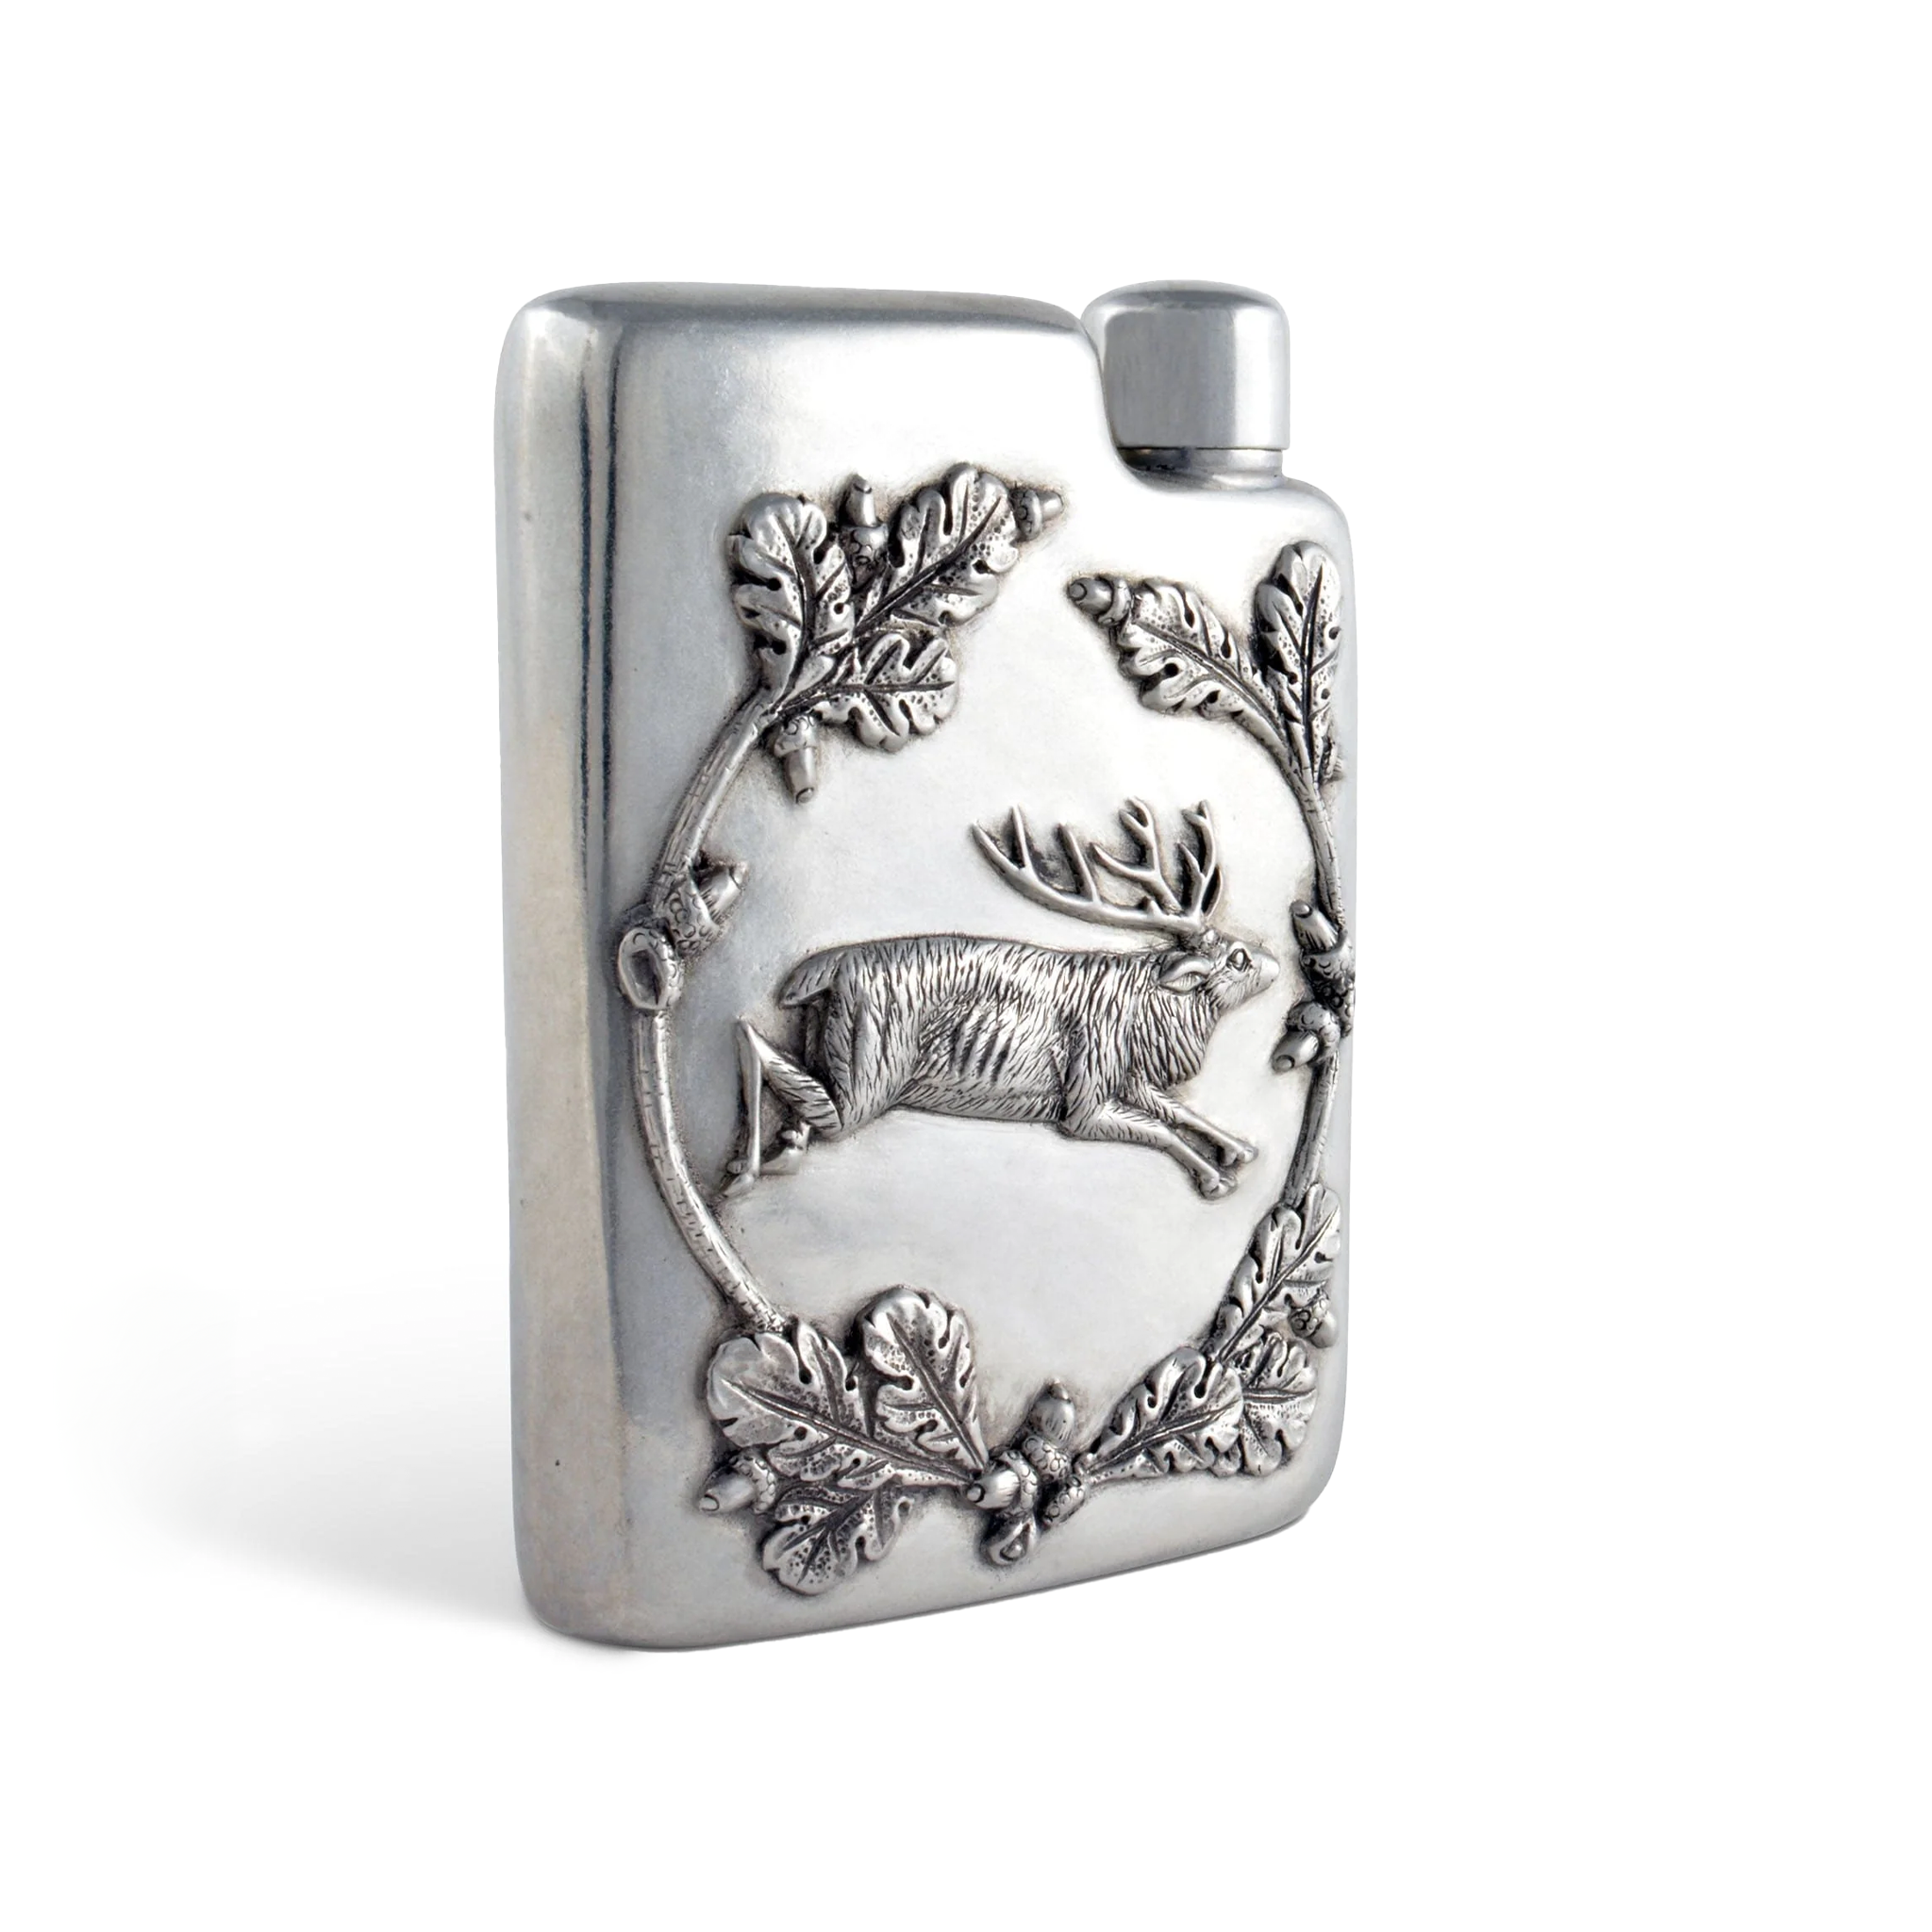 a pewter flask adorned with a majestic jumping elk, delicate acorns, and winding oak leaves